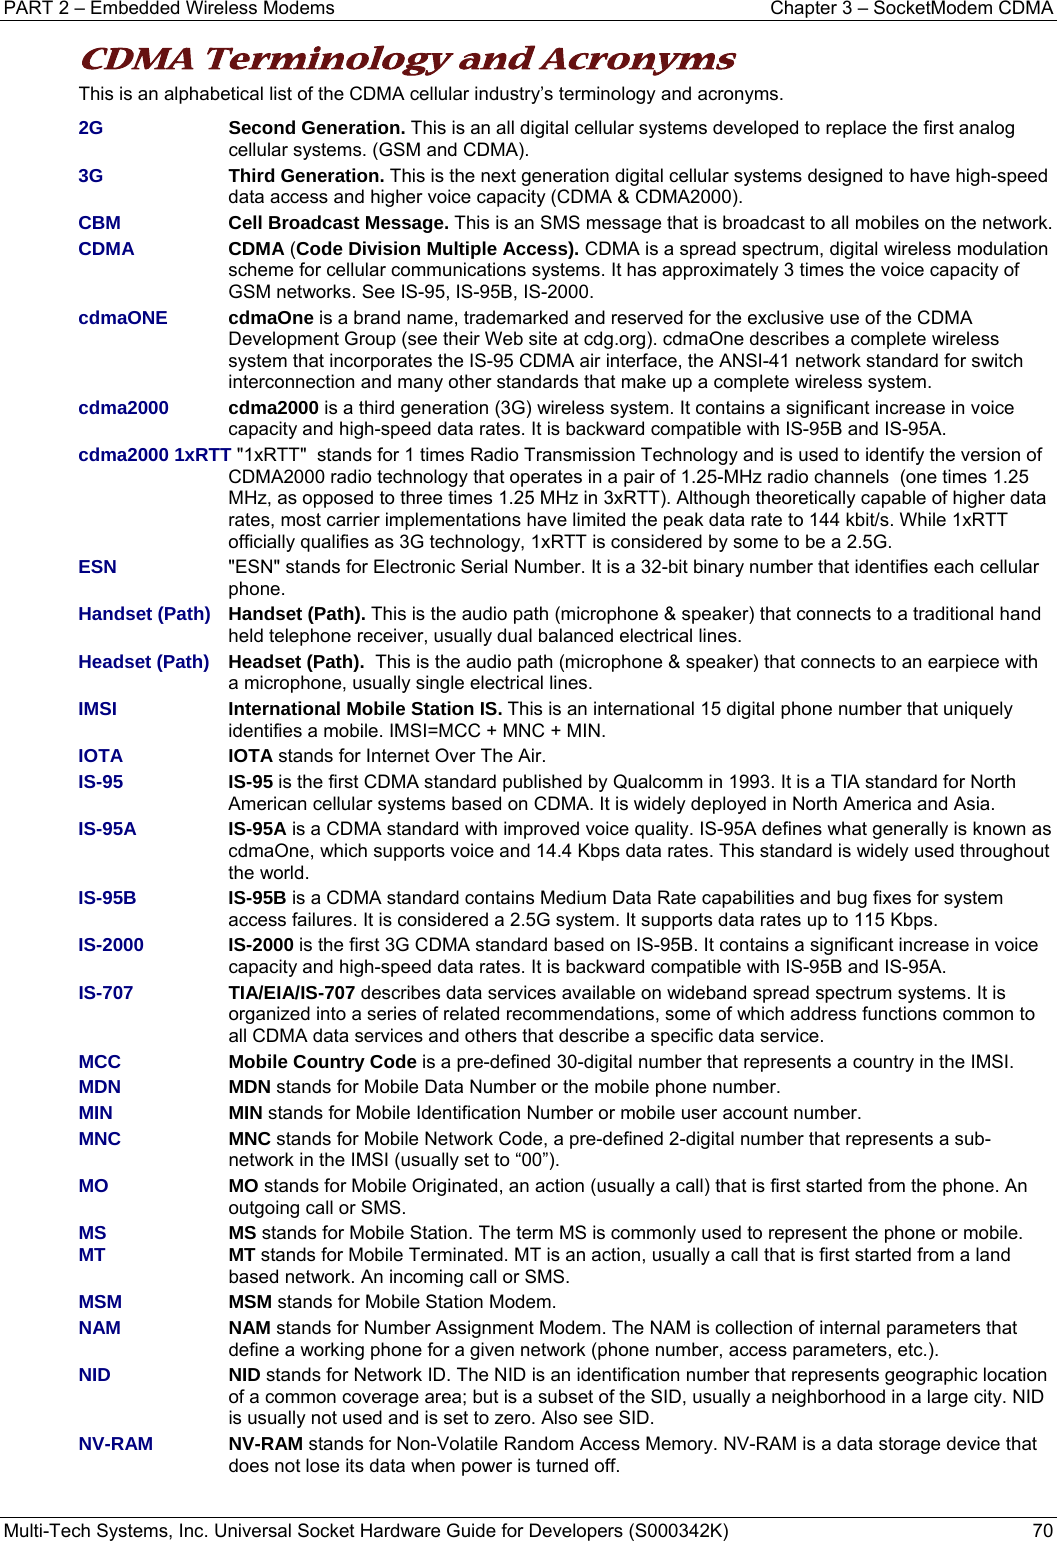 PART 2 – Embedded Wireless Modems  Chapter 3 – SocketModem CDMA  Multi-Tech Systems, Inc. Universal Socket Hardware Guide for Developers (S000342K)  70  CDMA Terminology and Acronyms  This is an alphabetical list of the CDMA cellular industry’s terminology and acronyms. 2G Second Generation. This is an all digital cellular systems developed to replace the first analog cellular systems. (GSM and CDMA). 3G Third Generation. This is the next generation digital cellular systems designed to have high-speed data access and higher voice capacity (CDMA &amp; CDMA2000). CBM Cell Broadcast Message. This is an SMS message that is broadcast to all mobiles on the network. CDMA CDMA (Code Division Multiple Access). CDMA is a spread spectrum, digital wireless modulation scheme for cellular communications systems. It has approximately 3 times the voice capacity of GSM networks. See IS-95, IS-95B, IS-2000. cdmaONE  cdmaOne is a brand name, trademarked and reserved for the exclusive use of the CDMA Development Group (see their Web site at cdg.org). cdmaOne describes a complete wireless system that incorporates the IS-95 CDMA air interface, the ANSI-41 network standard for switch interconnection and many other standards that make up a complete wireless system. cdma2000 cdma2000 is a third generation (3G) wireless system. It contains a significant increase in voice capacity and high-speed data rates. It is backward compatible with IS-95B and IS-95A.  cdma2000 1xRTT &quot;1xRTT&quot;  stands for 1 times Radio Transmission Technology and is used to identify the version of CDMA2000 radio technology that operates in a pair of 1.25-MHz radio channels  (one times 1.25 MHz, as opposed to three times 1.25 MHz in 3xRTT). Although theoretically capable of higher data rates, most carrier implementations have limited the peak data rate to 144 kbit/s. While 1xRTT officially qualifies as 3G technology, 1xRTT is considered by some to be a 2.5G. ESN  &quot;ESN&quot; stands for Electronic Serial Number. It is a 32-bit binary number that identifies each cellular phone.  Handset (Path) Handset (Path). This is the audio path (microphone &amp; speaker) that connects to a traditional hand held telephone receiver, usually dual balanced electrical lines.  Headset (Path)   Headset (Path).  This is the audio path (microphone &amp; speaker) that connects to an earpiece with a microphone, usually single electrical lines. IMSI International Mobile Station IS. This is an international 15 digital phone number that uniquely identifies a mobile. IMSI=MCC + MNC + MIN. IOTA IOTA stands for Internet Over The Air. IS-95 IS-95 is the first CDMA standard published by Qualcomm in 1993. It is a TIA standard for North American cellular systems based on CDMA. It is widely deployed in North America and Asia.  IS-95A  IS-95A is a CDMA standard with improved voice quality. IS-95A defines what generally is known as cdmaOne, which supports voice and 14.4 Kbps data rates. This standard is widely used throughout the world.  IS-95B IS-95B is a CDMA standard contains Medium Data Rate capabilities and bug fixes for system access failures. It is considered a 2.5G system. It supports data rates up to 115 Kbps. IS-2000 IS-2000 is the first 3G CDMA standard based on IS-95B. It contains a significant increase in voice capacity and high-speed data rates. It is backward compatible with IS-95B and IS-95A.  IS-707 TIA/EIA/IS-707 describes data services available on wideband spread spectrum systems. It is organized into a series of related recommendations, some of which address functions common to all CDMA data services and others that describe a specific data service. MCC   Mobile Country Code is a pre-defined 30-digital number that represents a country in the IMSI. MDN   MDN stands for Mobile Data Number or the mobile phone number. MIN   MIN stands for Mobile Identification Number or mobile user account number. MNC  MNC stands for Mobile Network Code, a pre-defined 2-digital number that represents a sub-network in the IMSI (usually set to “00”). MO   MO stands for Mobile Originated, an action (usually a call) that is first started from the phone. An outgoing call or SMS.  MS  MS stands for Mobile Station. The term MS is commonly used to represent the phone or mobile. MT MT stands for Mobile Terminated. MT is an action, usually a call that is first started from a land based network. An incoming call or SMS. MSM MSM stands for Mobile Station Modem.  NAM NAM stands for Number Assignment Modem. The NAM is collection of internal parameters that define a working phone for a given network (phone number, access parameters, etc.).  NID NID stands for Network ID. The NID is an identification number that represents geographic location of a common coverage area; but is a subset of the SID, usually a neighborhood in a large city. NID is usually not used and is set to zero. Also see SID. NV-RAM   NV-RAM stands for Non-Volatile Random Access Memory. NV-RAM is a data storage device that does not lose its data when power is turned off.   